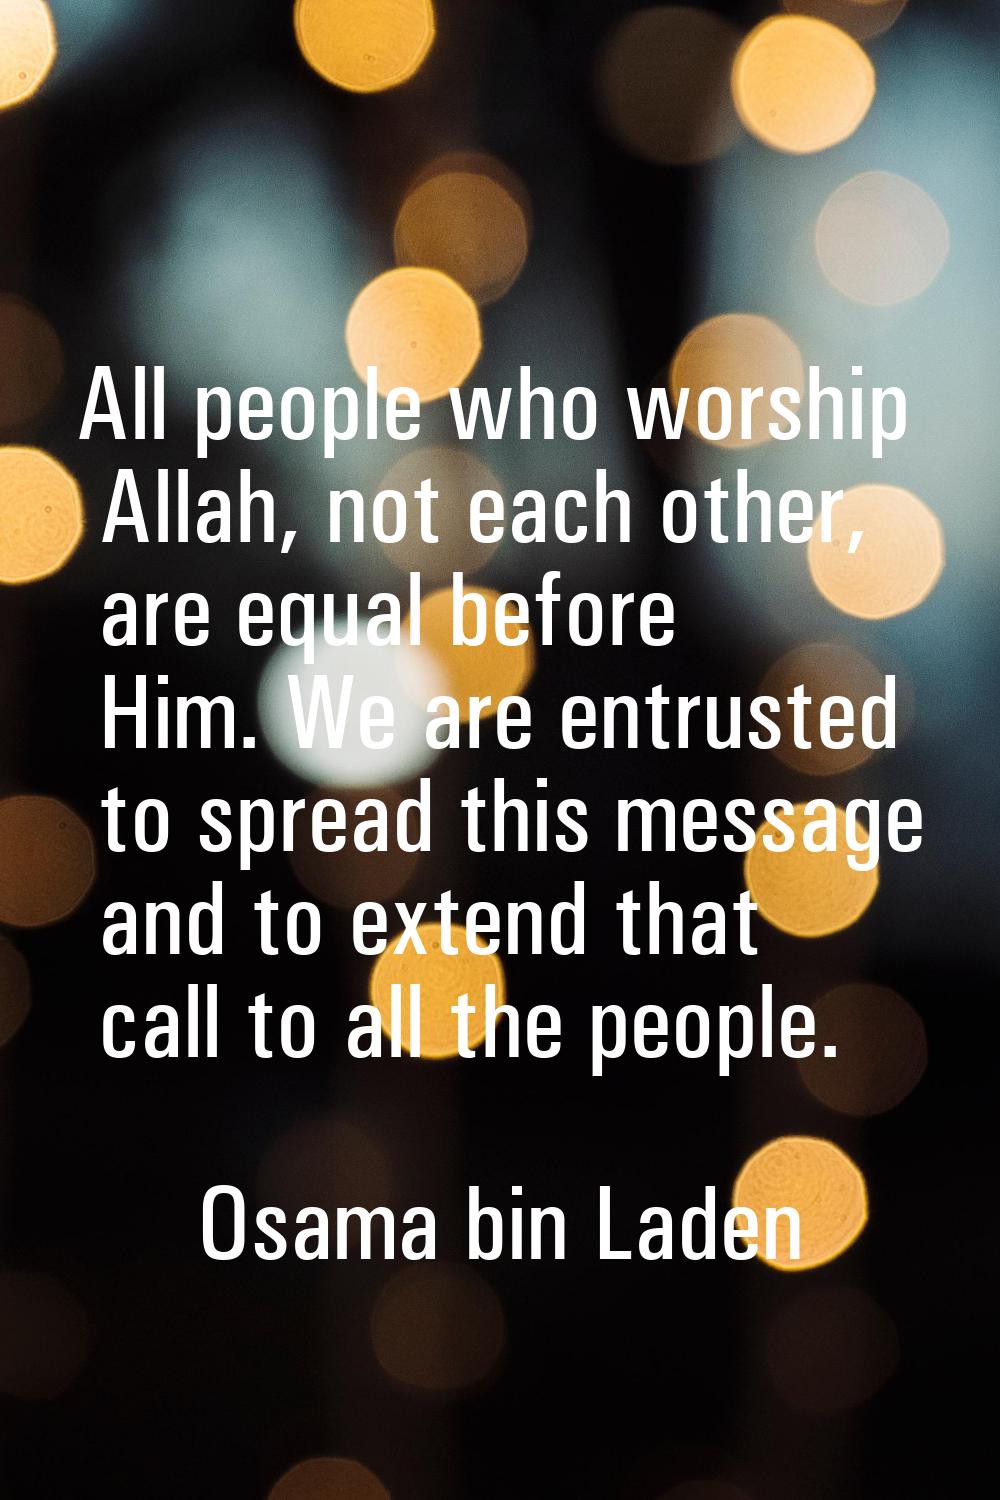 All people who worship Allah, not each other, are equal before Him. We are entrusted to spread this